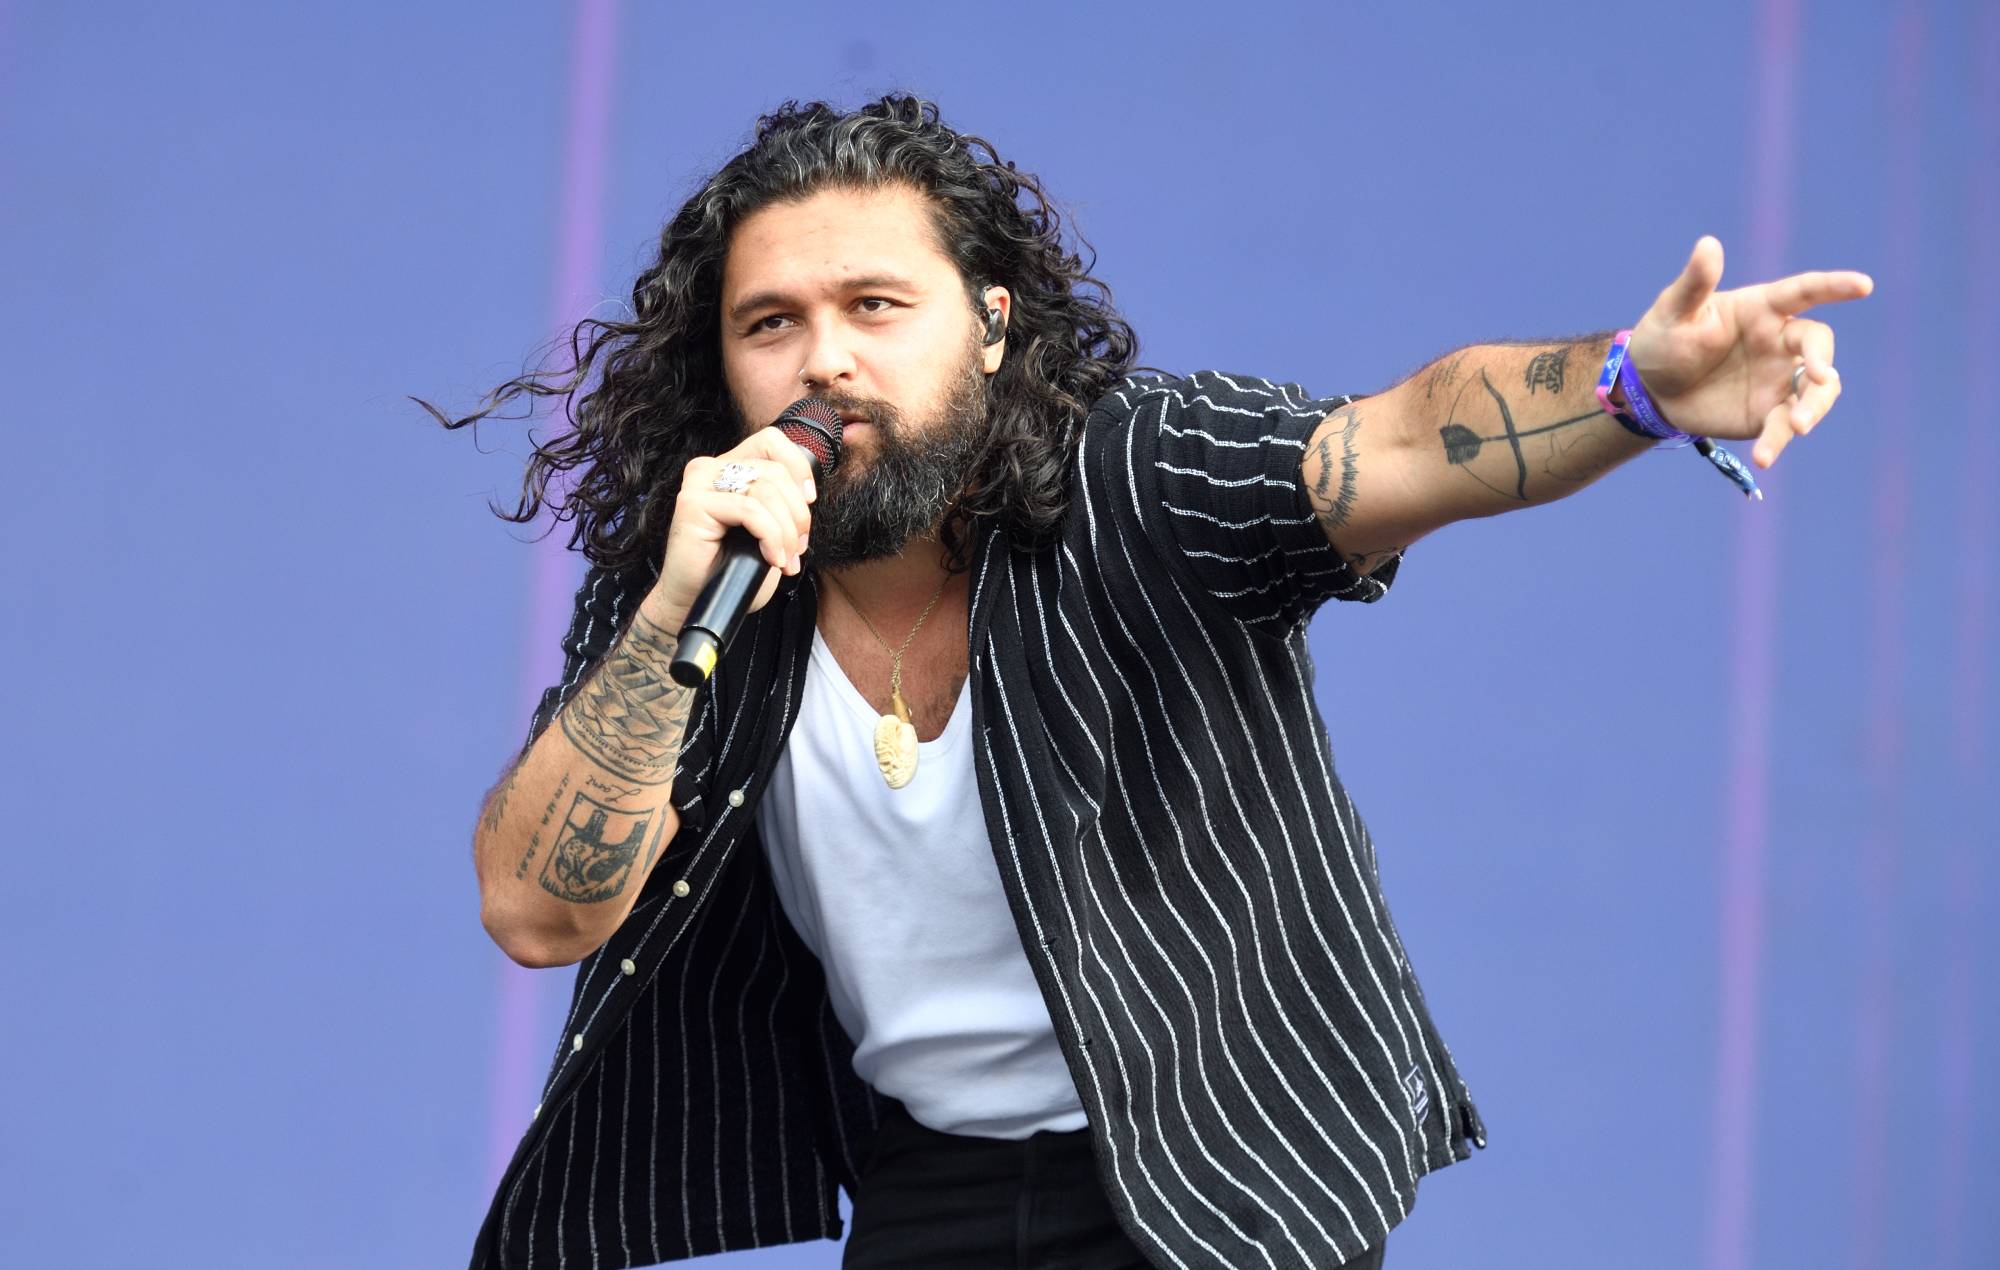 Check out Gang Of Youths’ festive cover of ‘Have Yourself A Merry Little Christmas’